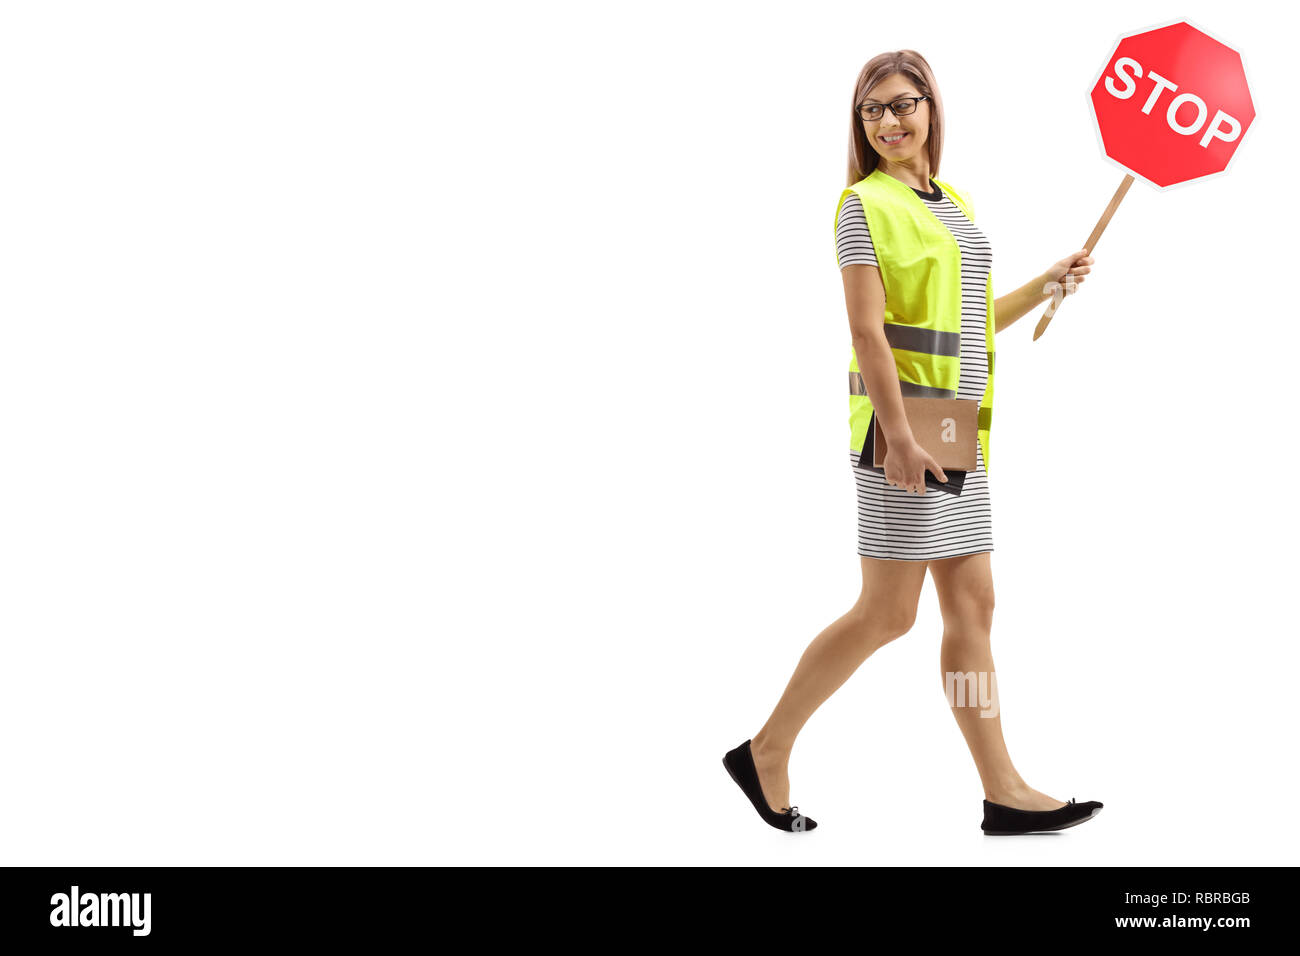 Full length shot of a young woman with safety vest and stop sign walking and looking backwards isolated on white background Stock Photo